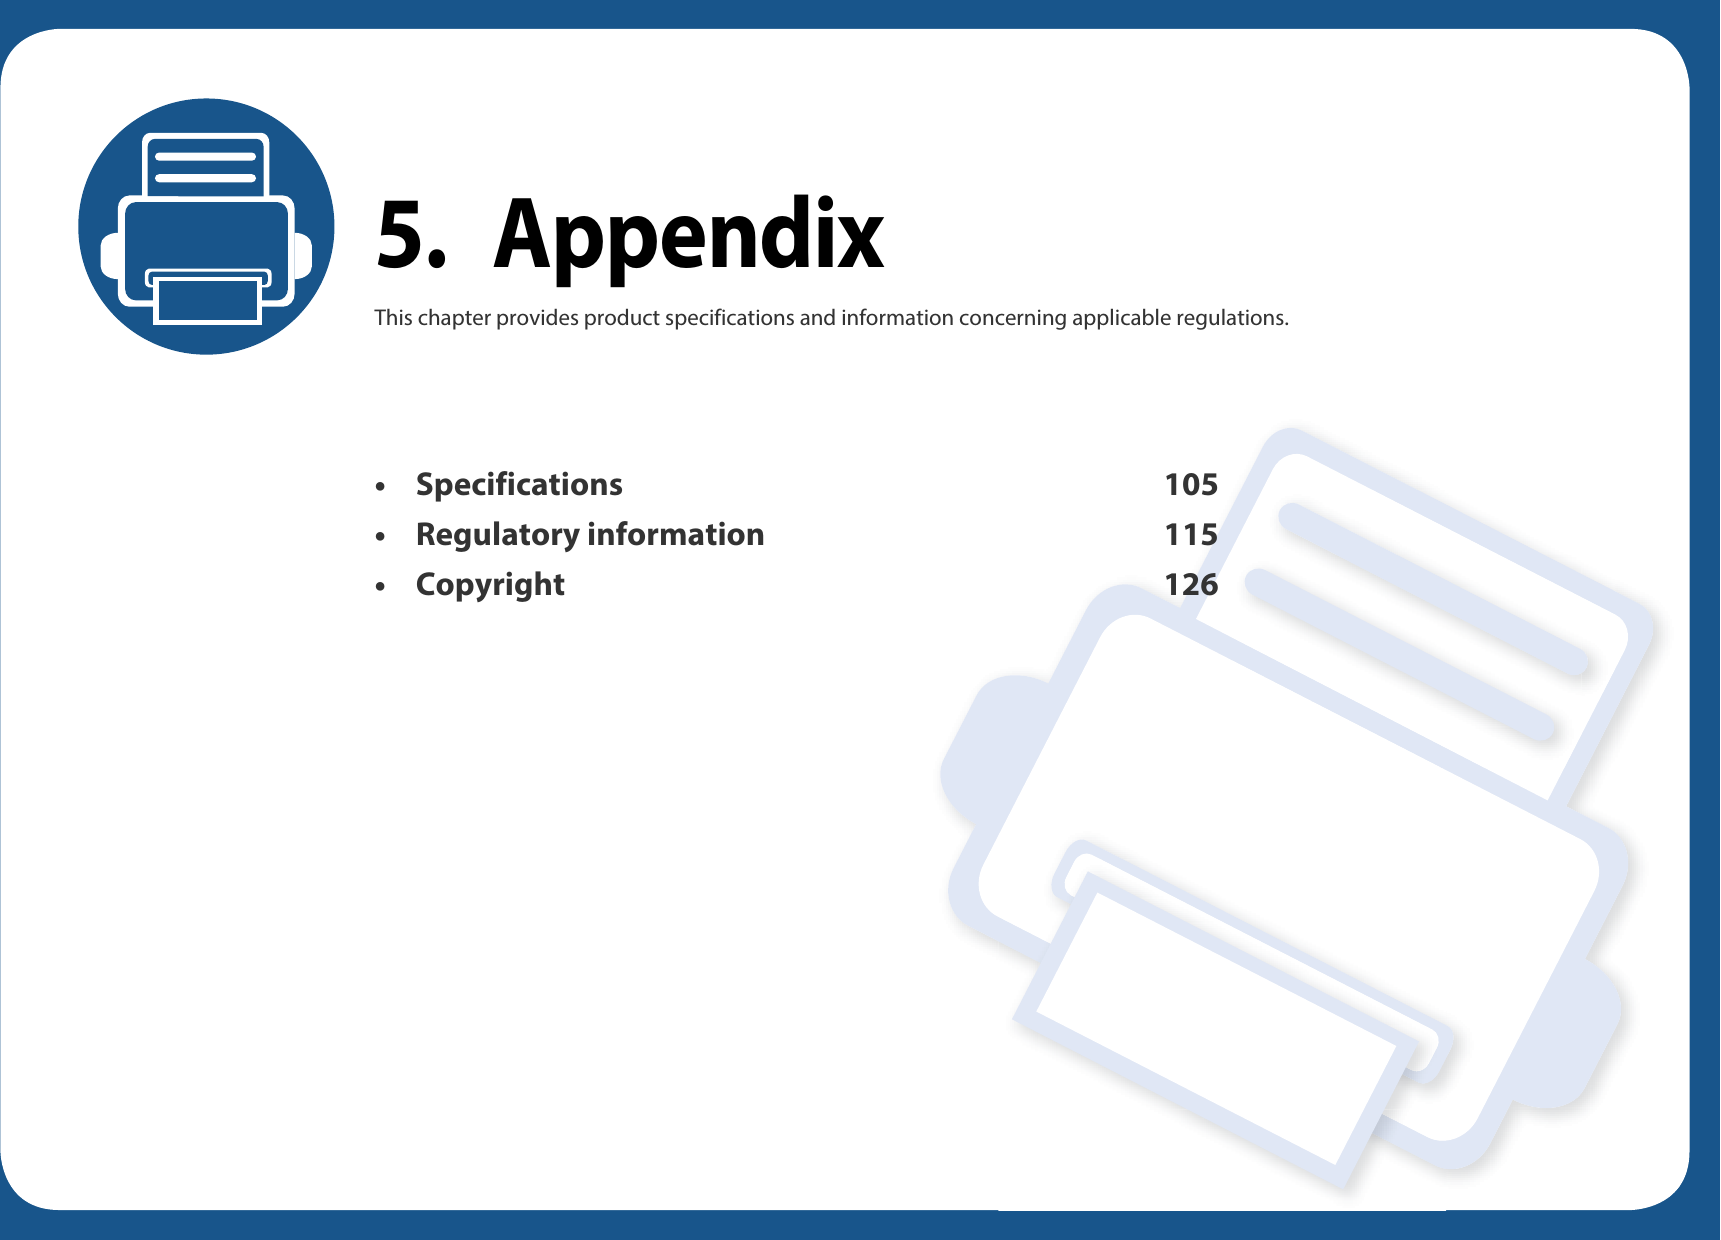 5. AppendixThis chapter provides product specifications and information concerning applicable regulations.• Specifications 105• Regulatory information 115• Copyright 126